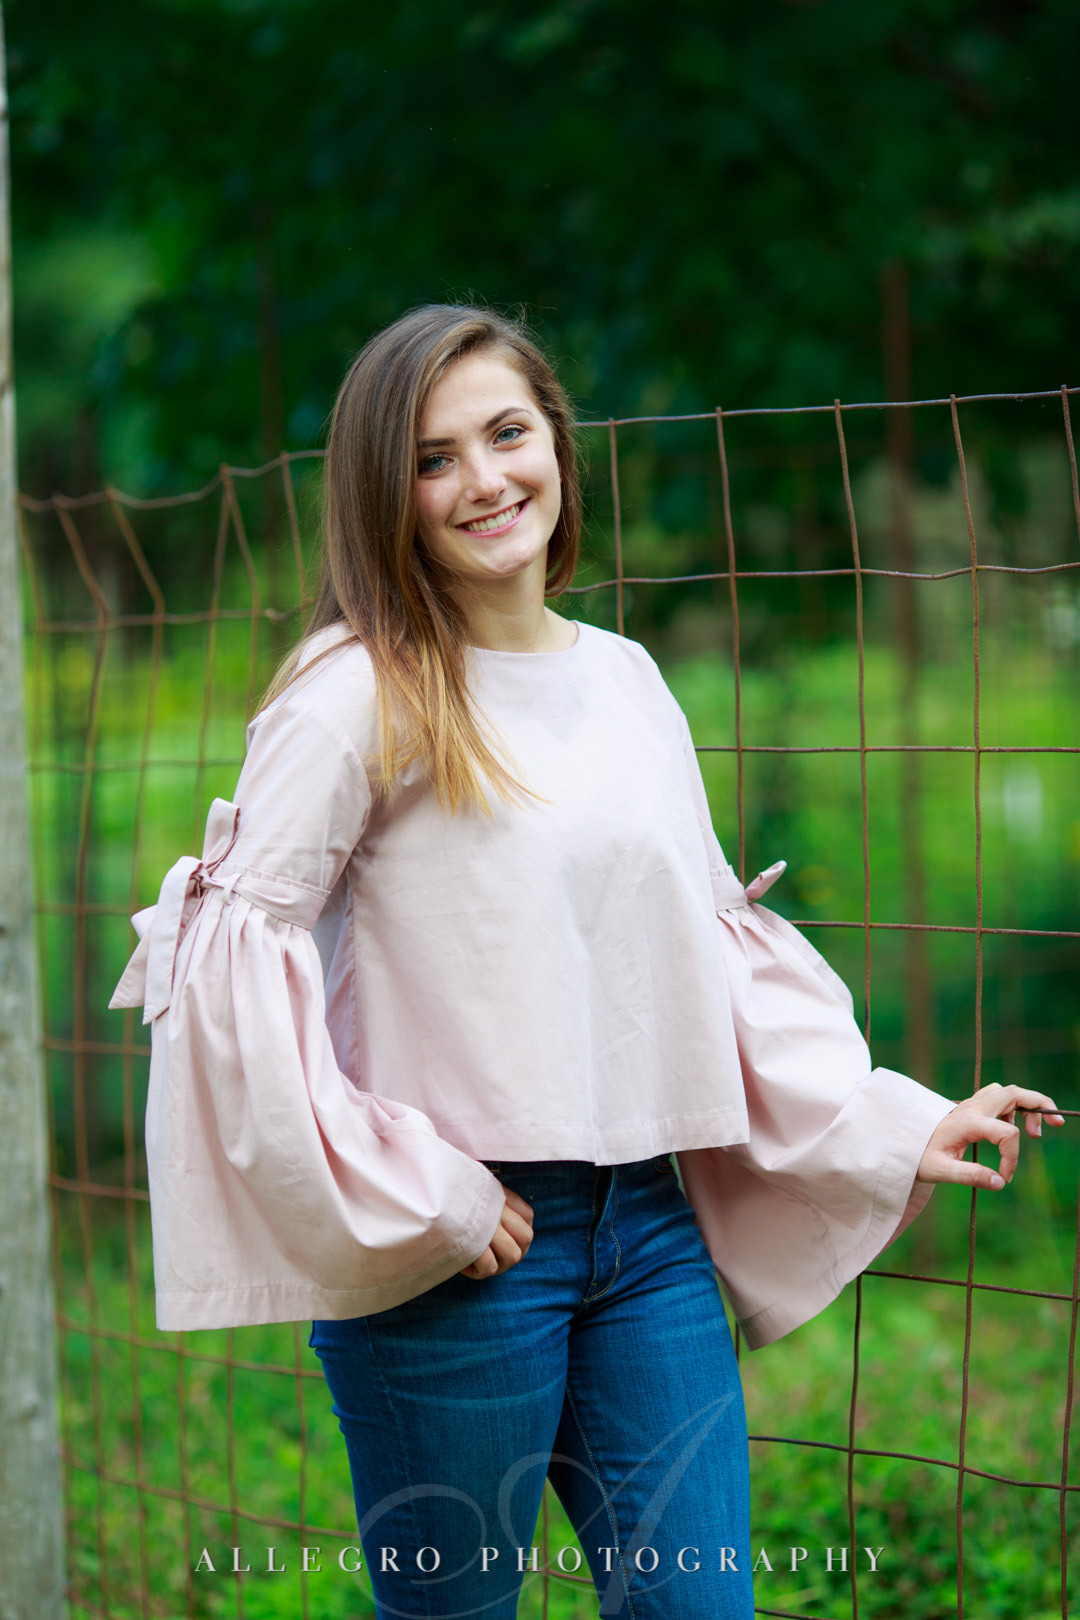 allegro photography senior pics- warm and welcoming girl